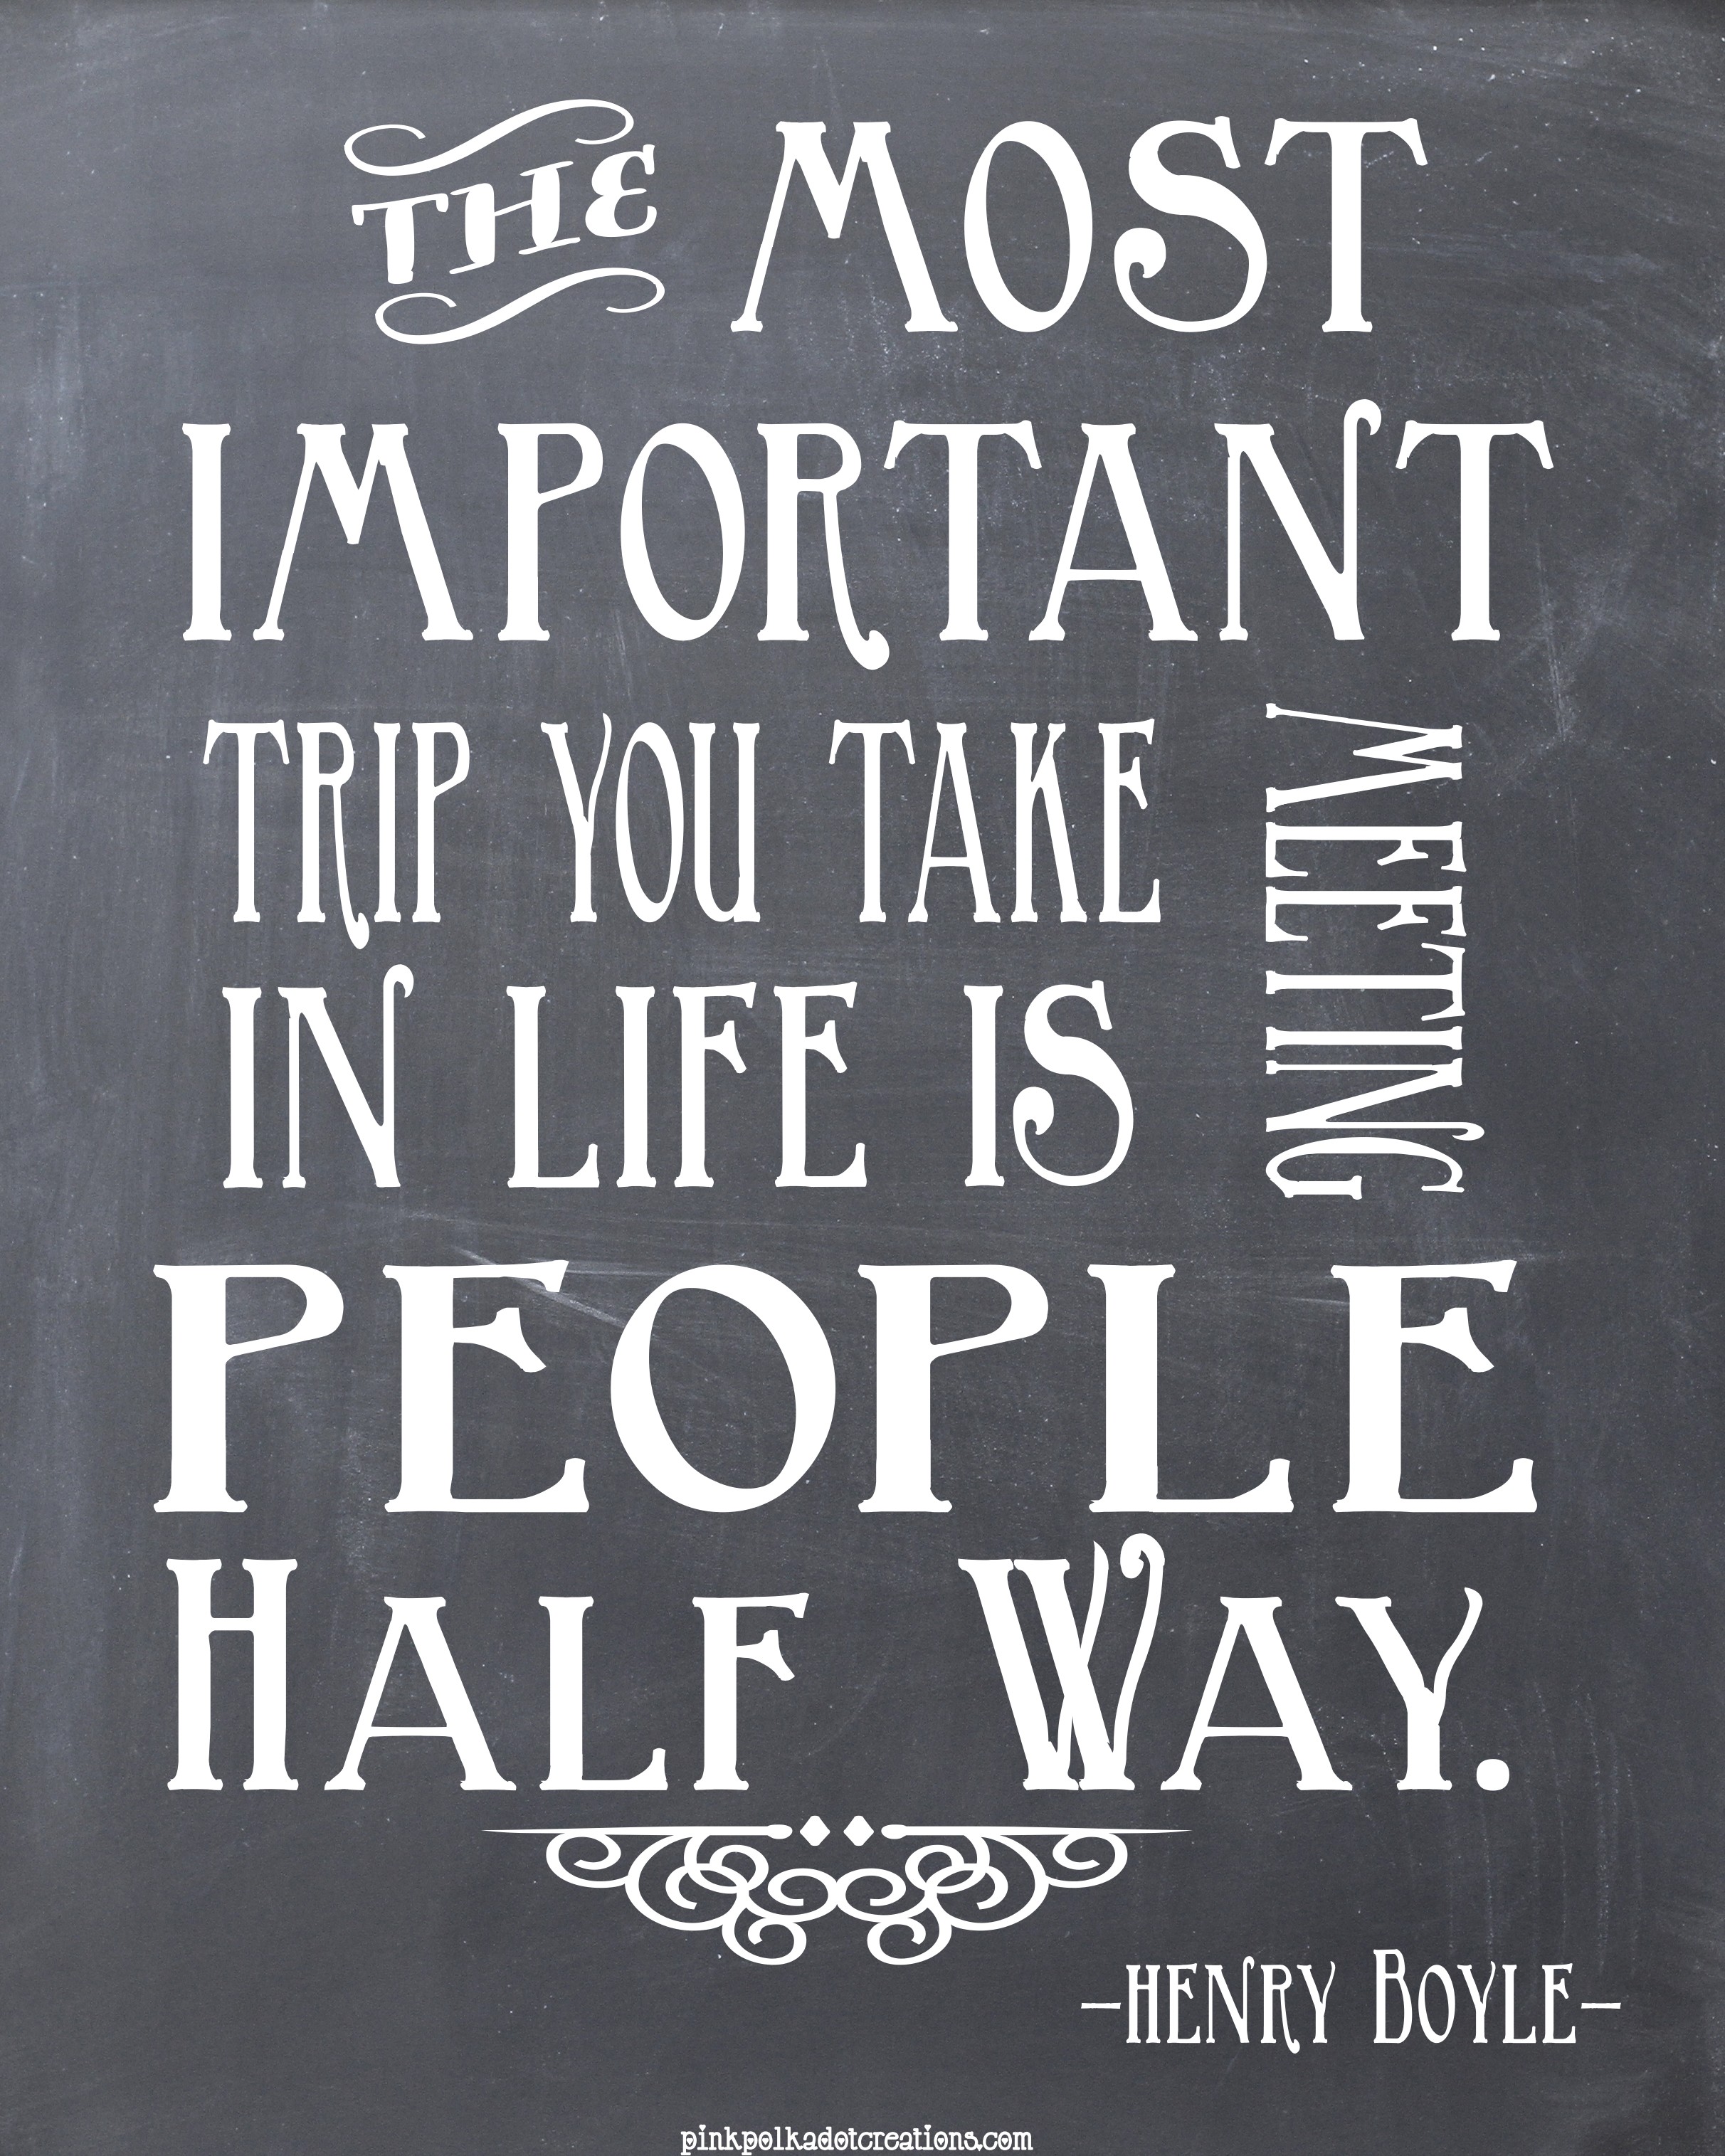 Thursday's Thought-The Most Important Trip... - Pink Polka Dot Creations